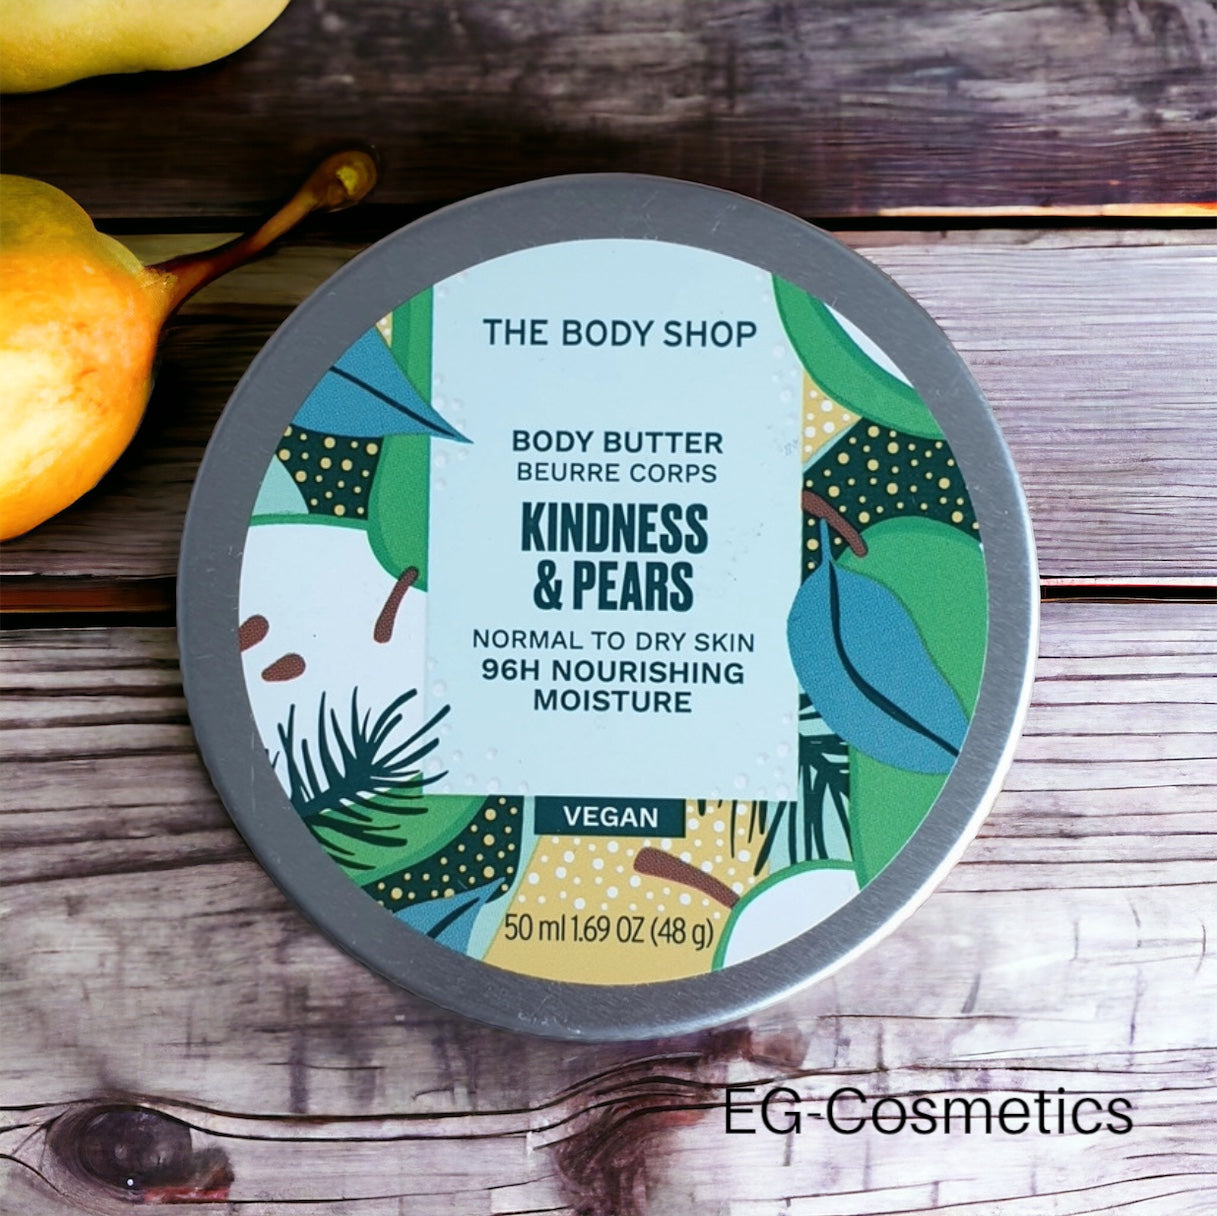 The Body Shop KINDNESS & PEARS Body Butter 50ml